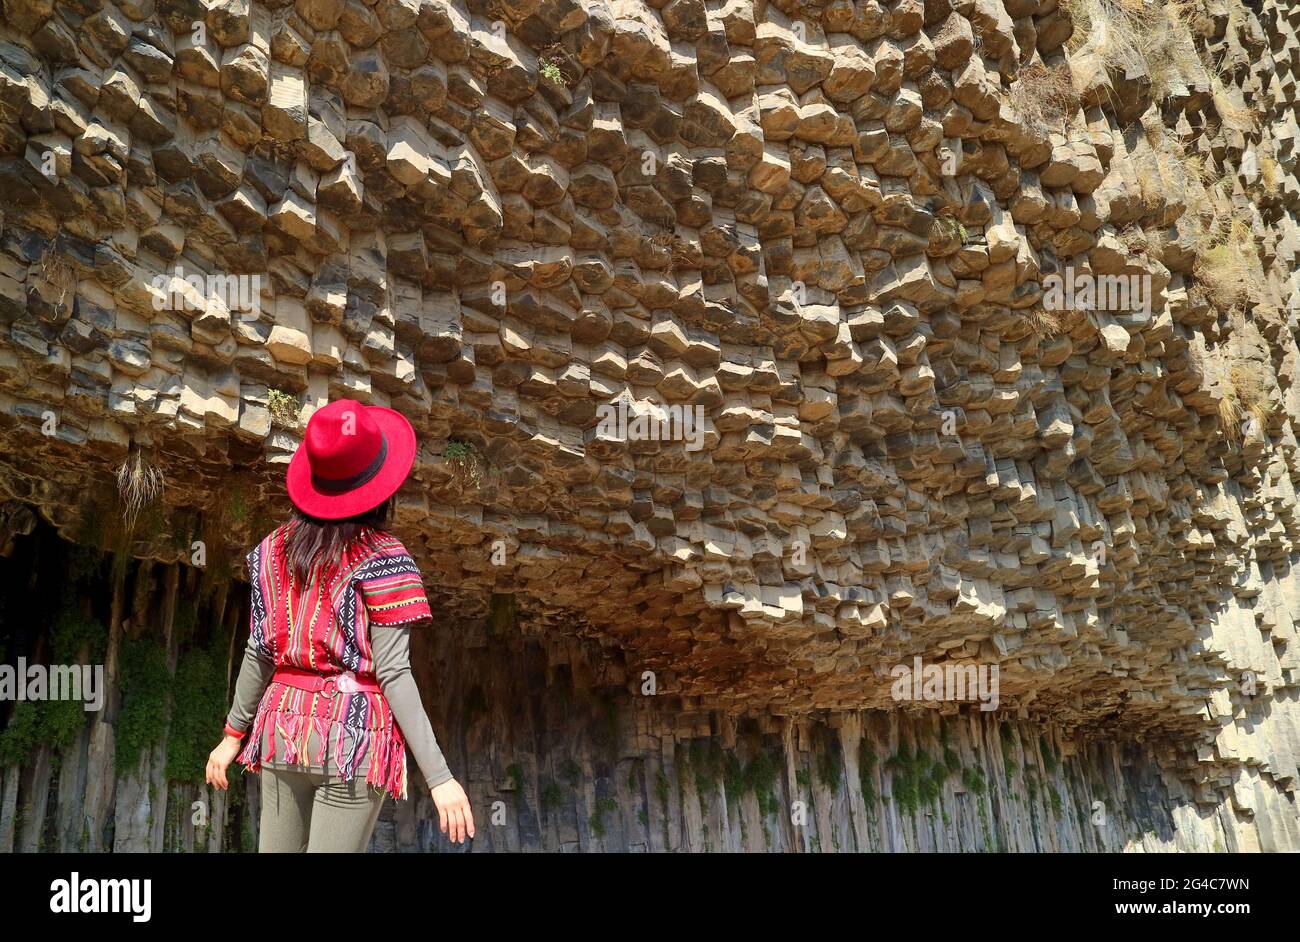 Female tourist Being Impressed by the Incredible Symphony of Stones Basalt Column Formations Along the Garni Gorge, Armenia Stock Photo